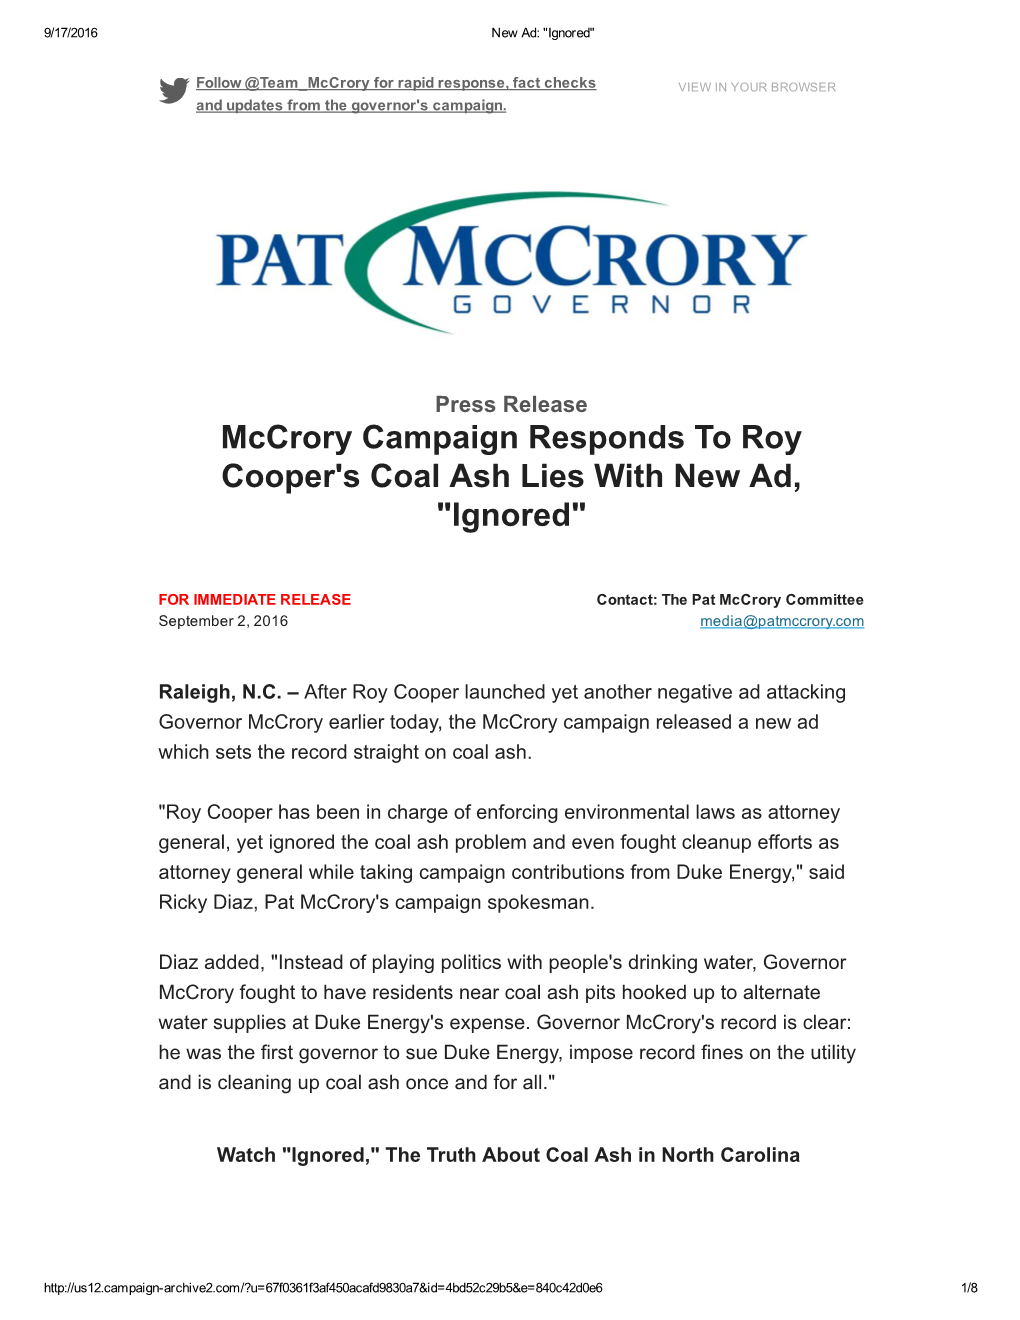 Mccrory Campaign Responds to Roy Cooper's Coal Ash Lies with New Ad, "Ignored"